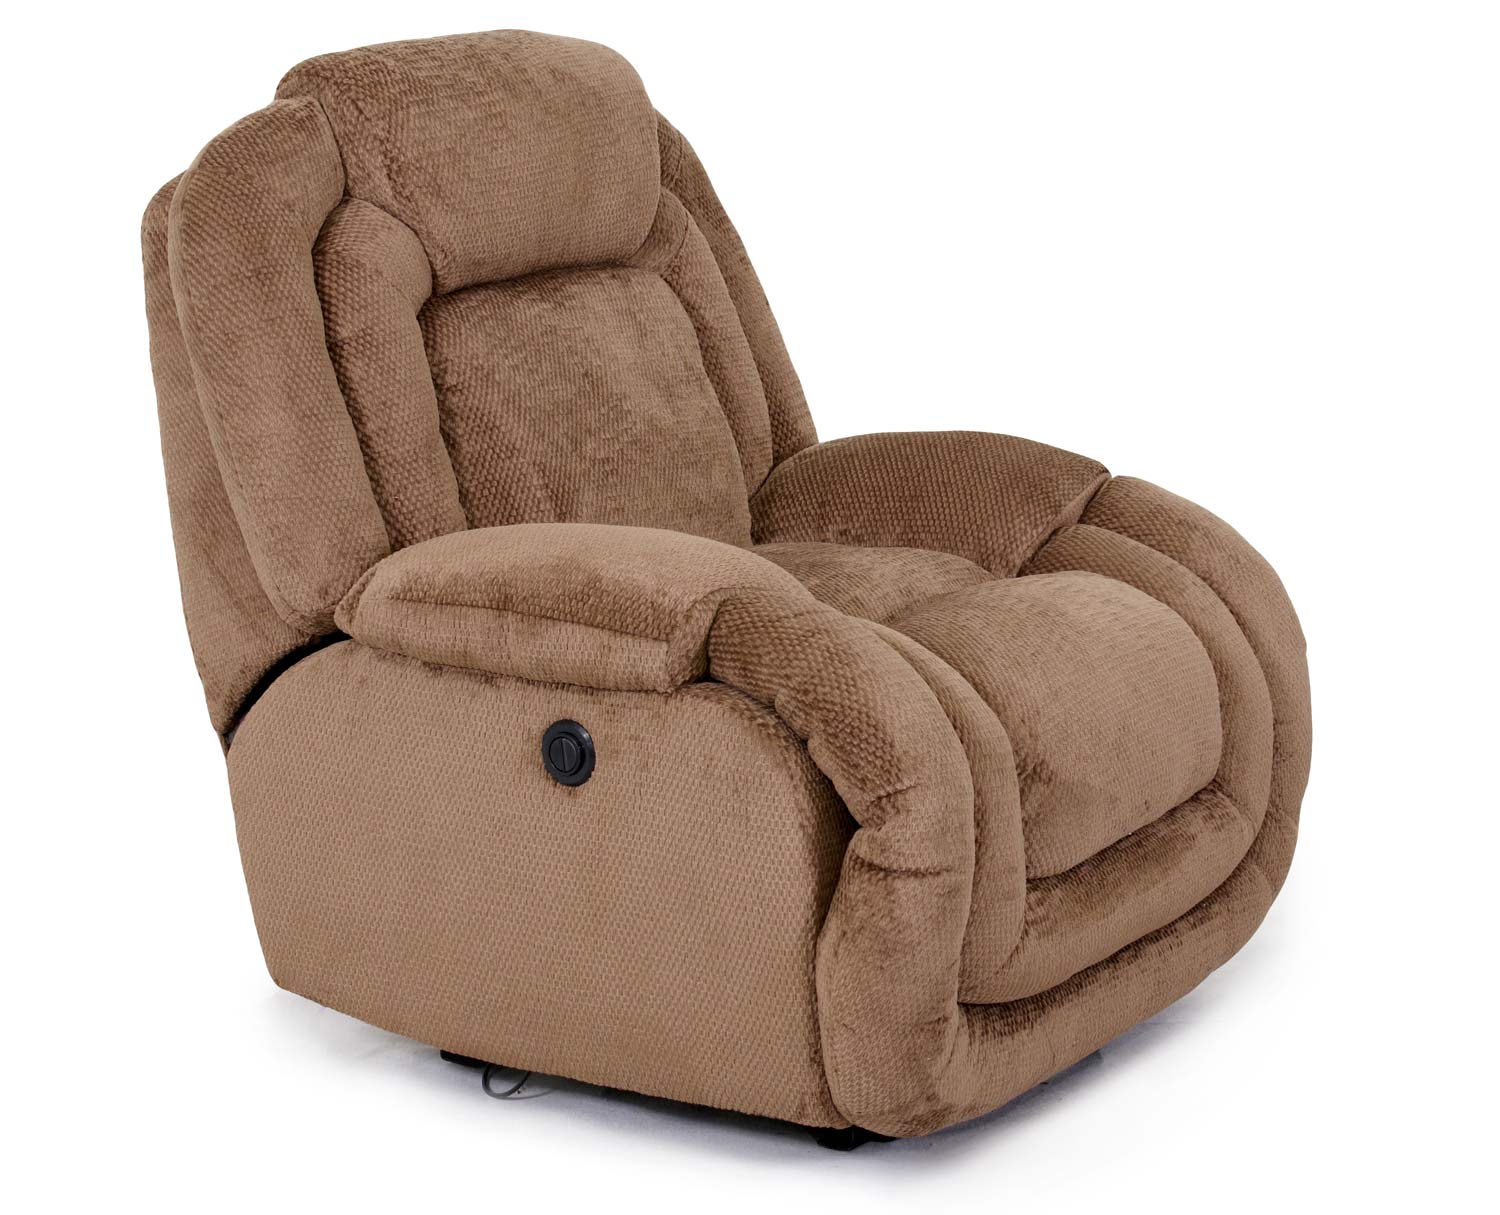 Barcalounger Apex II Casual Comforts Power Recliner Chair - Dallas Mink